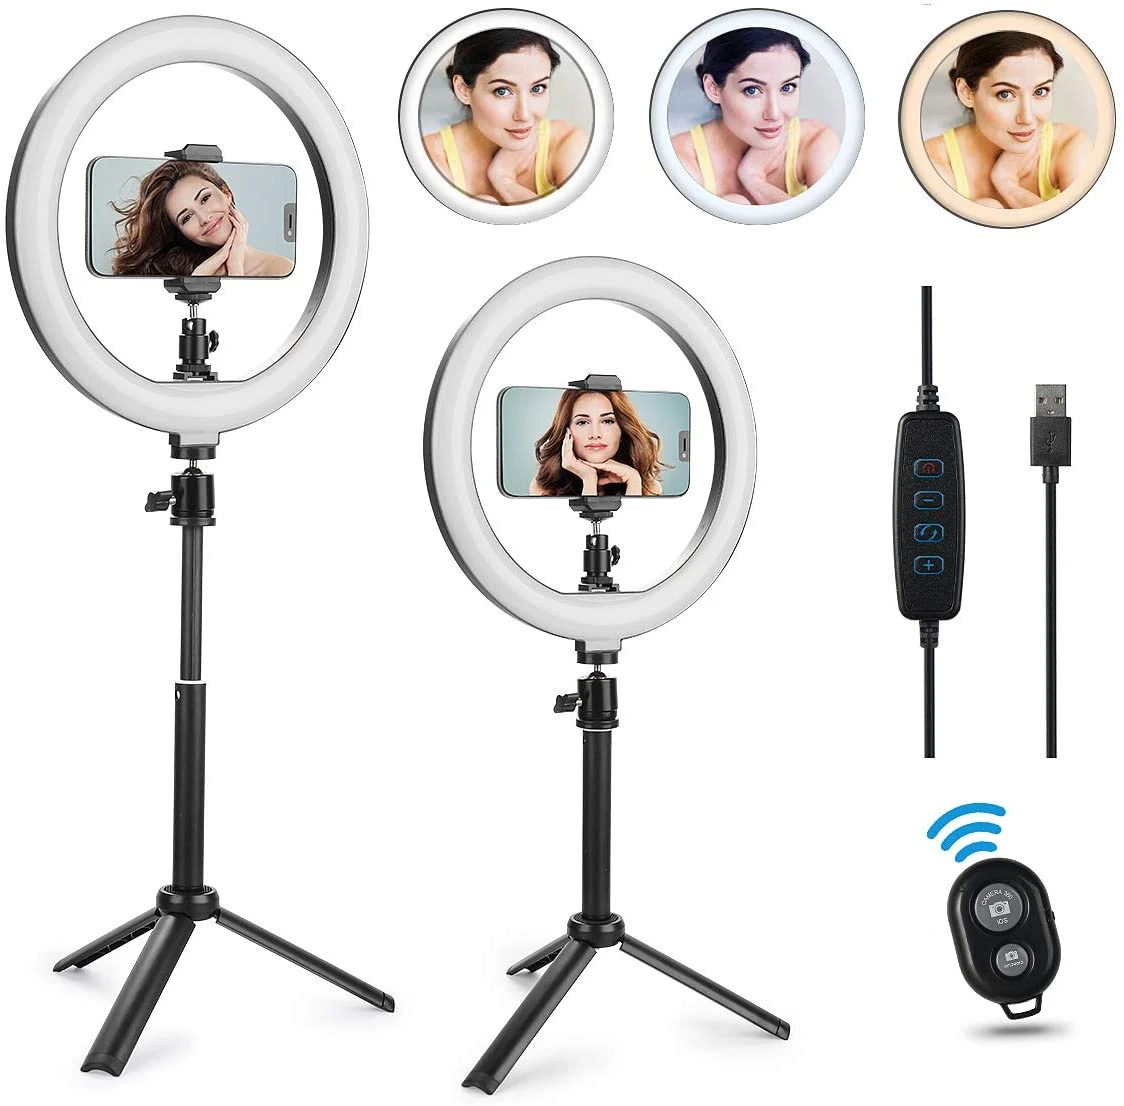 10.2" ring light led selfie with rotary tripod stand and phone holder,  Desktop Selfie Light Ring Led Camera Ringlight